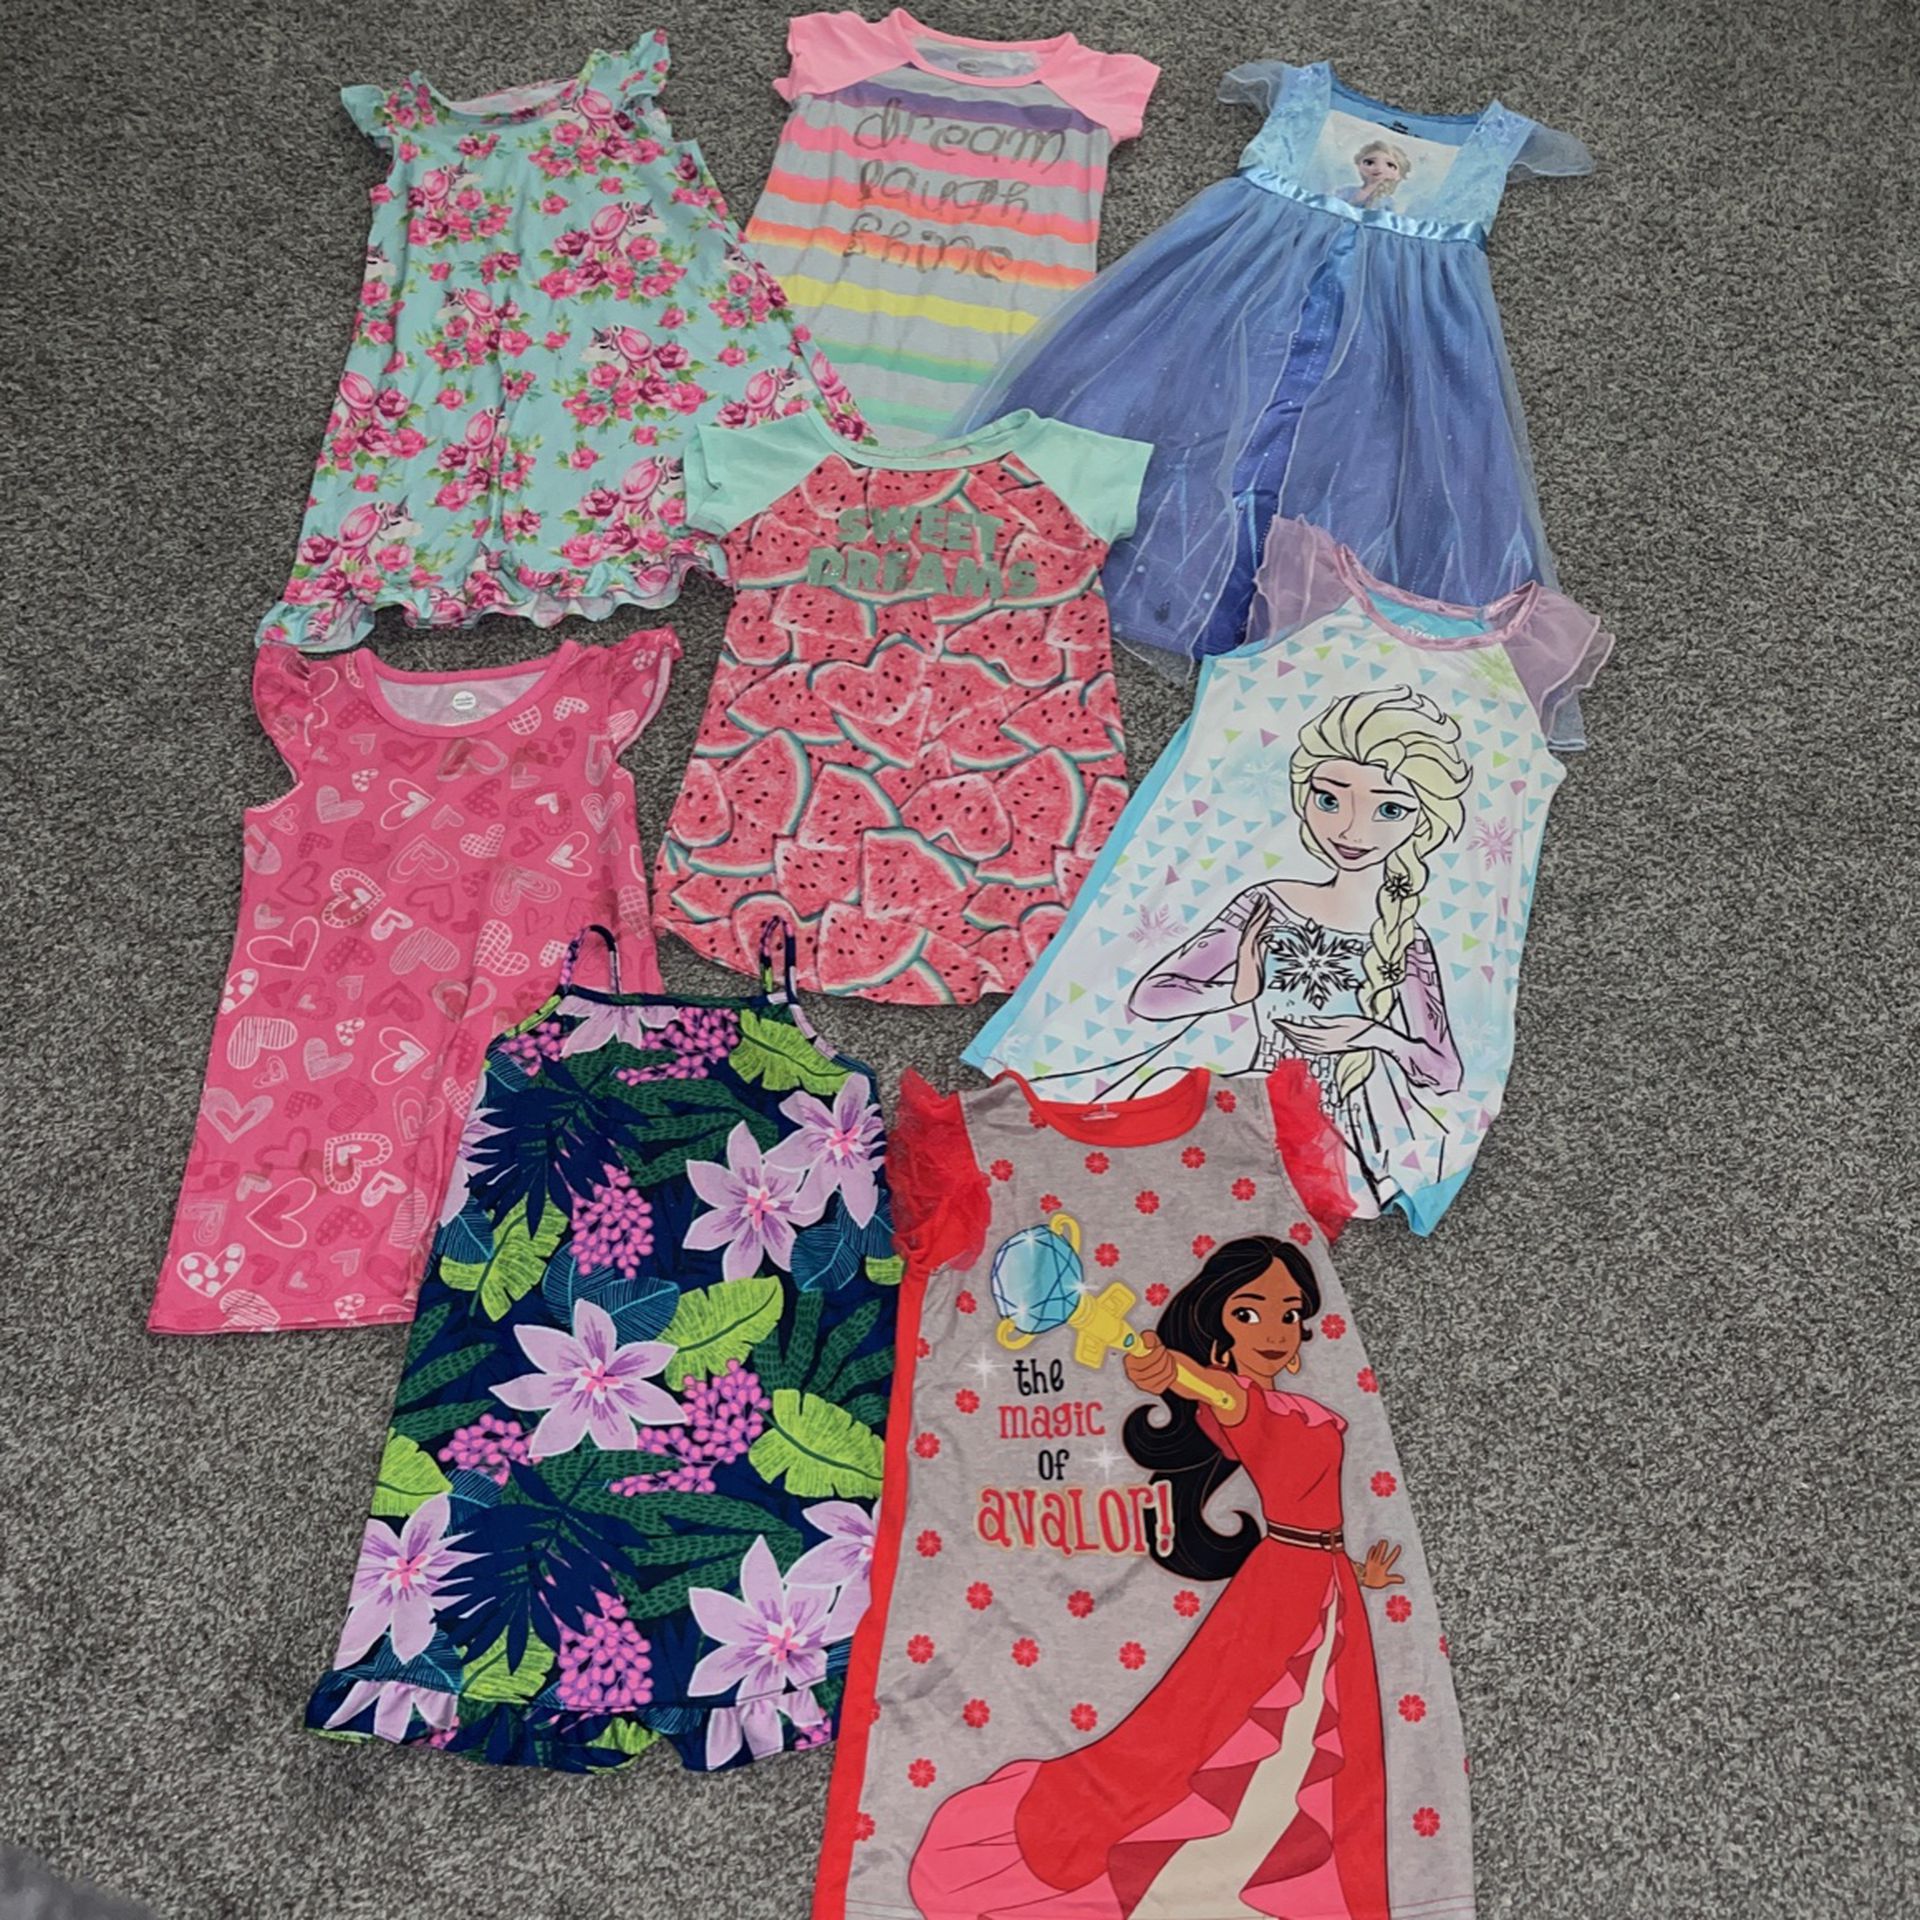 Little Girl Size 4-5 Nightgown Pajamas 